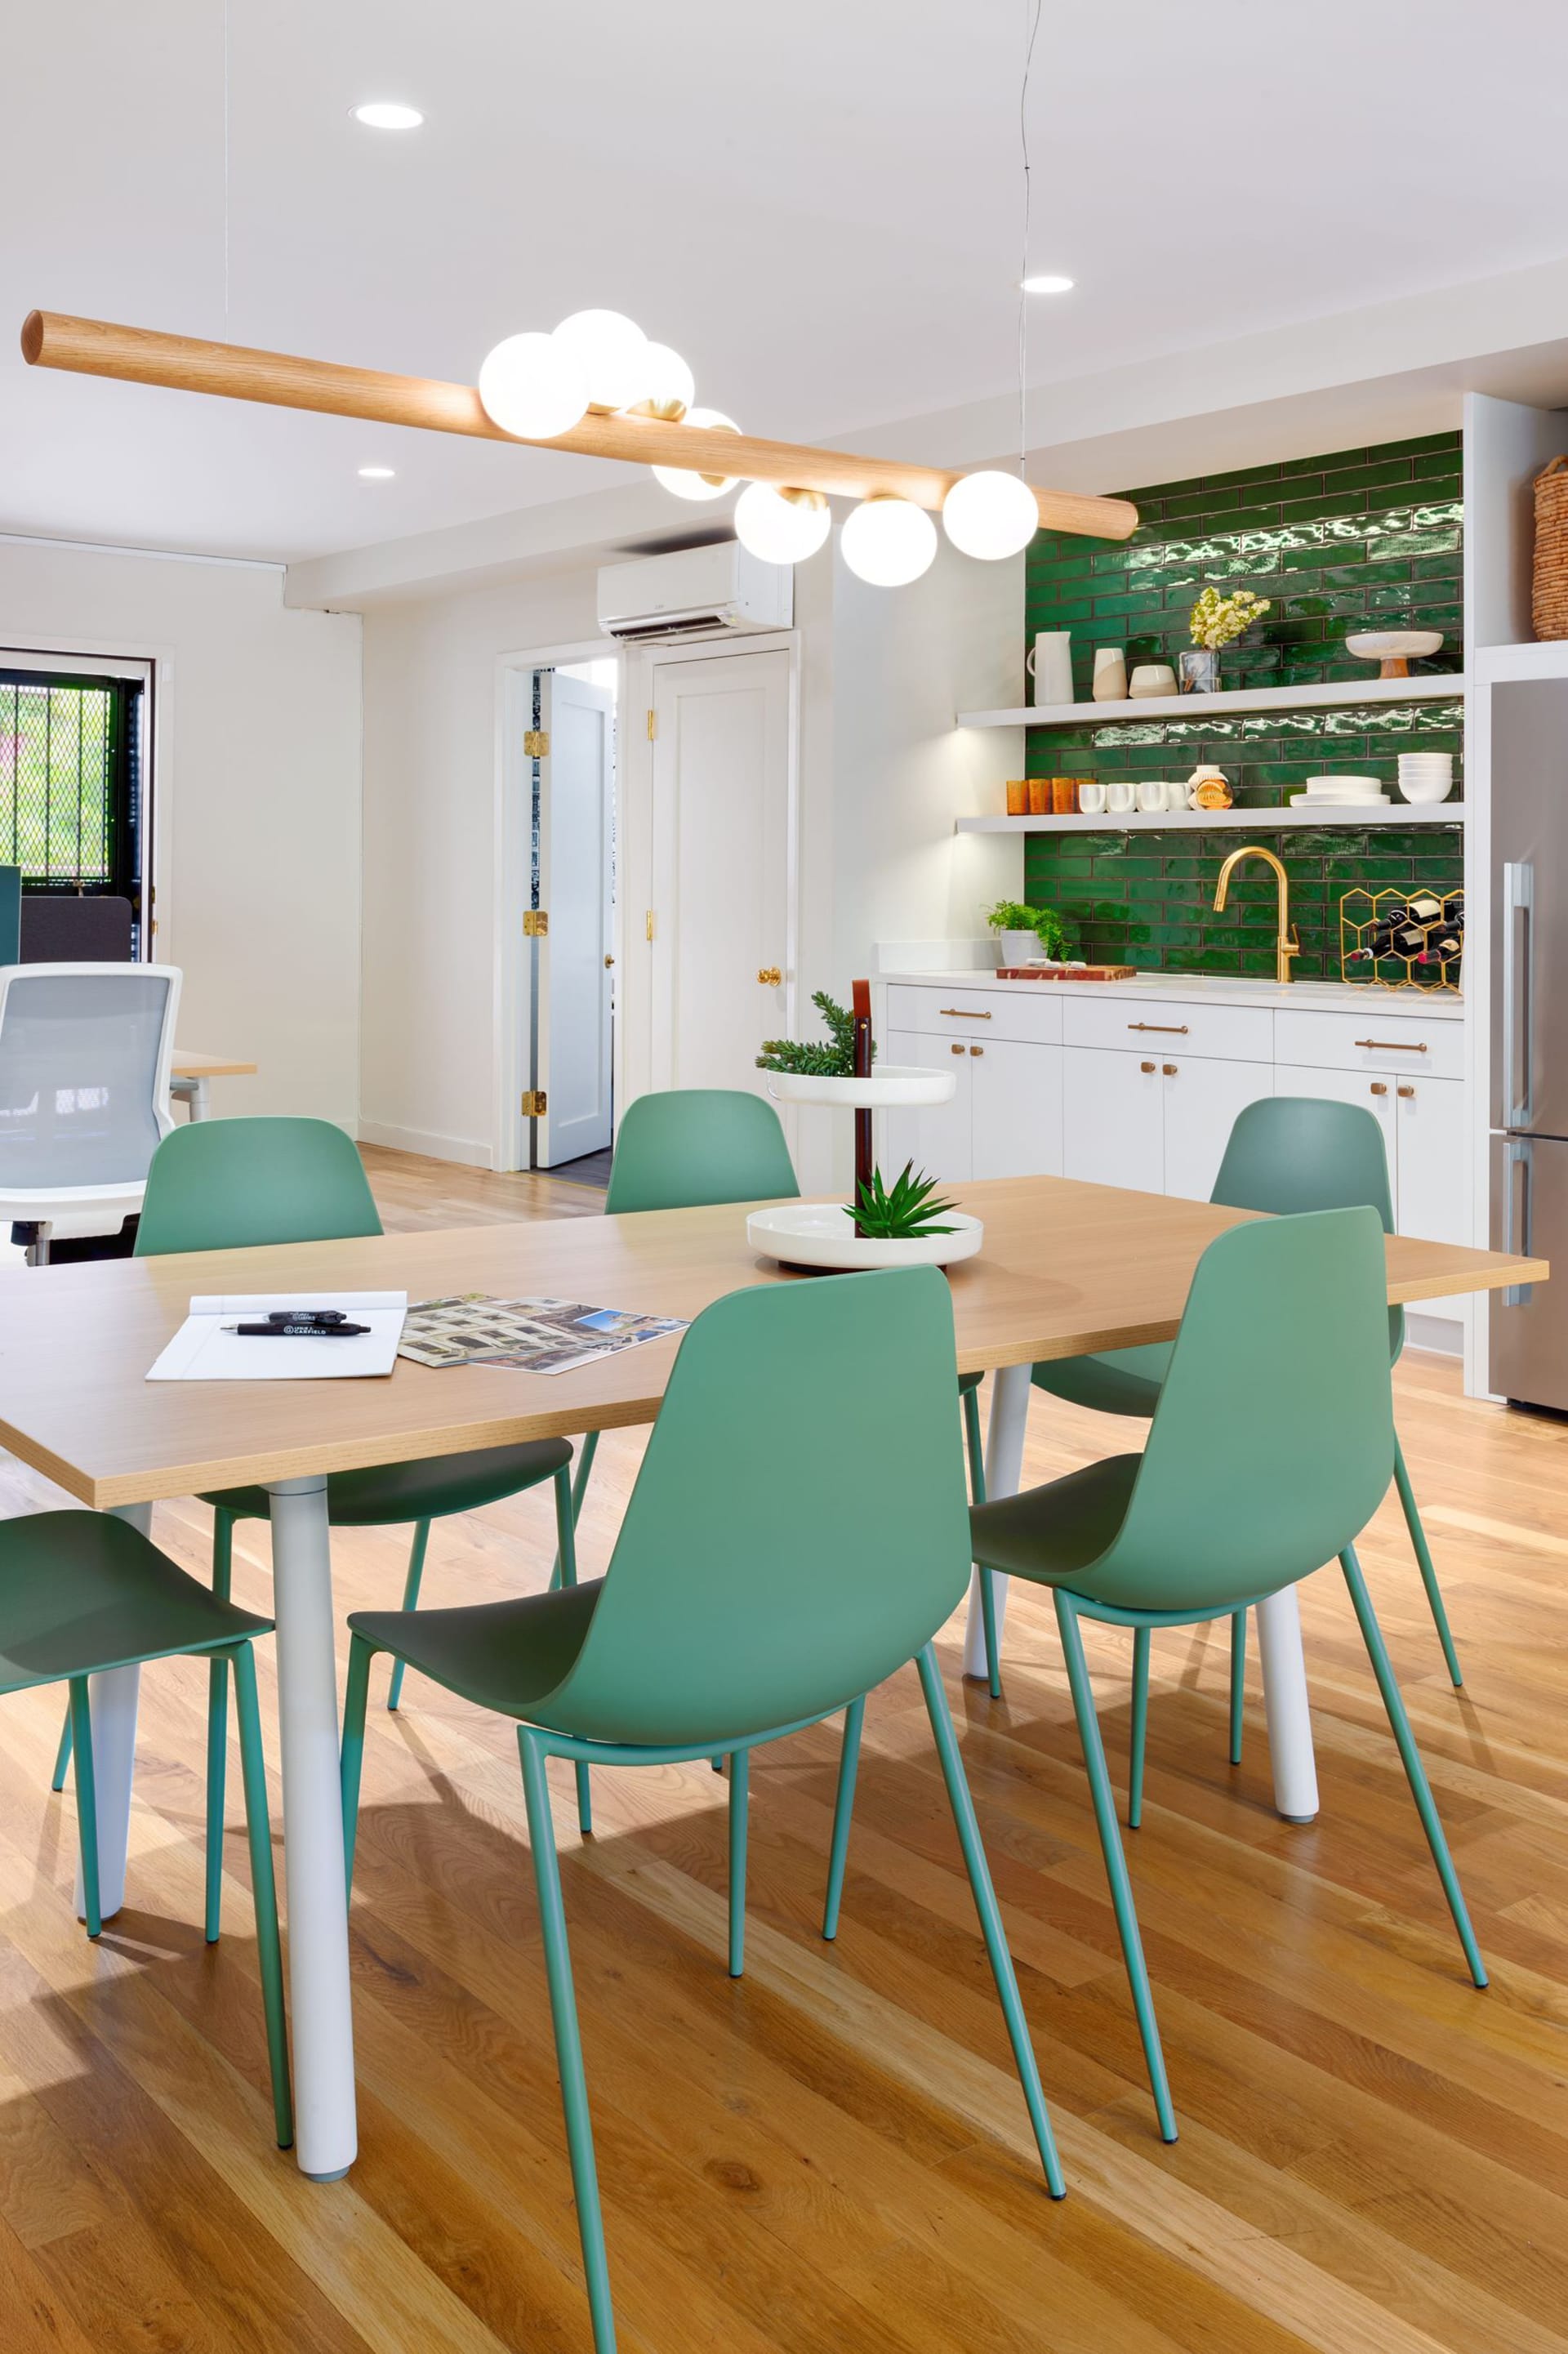 Dining area in a real estate office with wood floors, wood dining table, green dining chairs, and statement chandelier above the table. In the background sits a kitchenette with dark green subway tile backsplash.